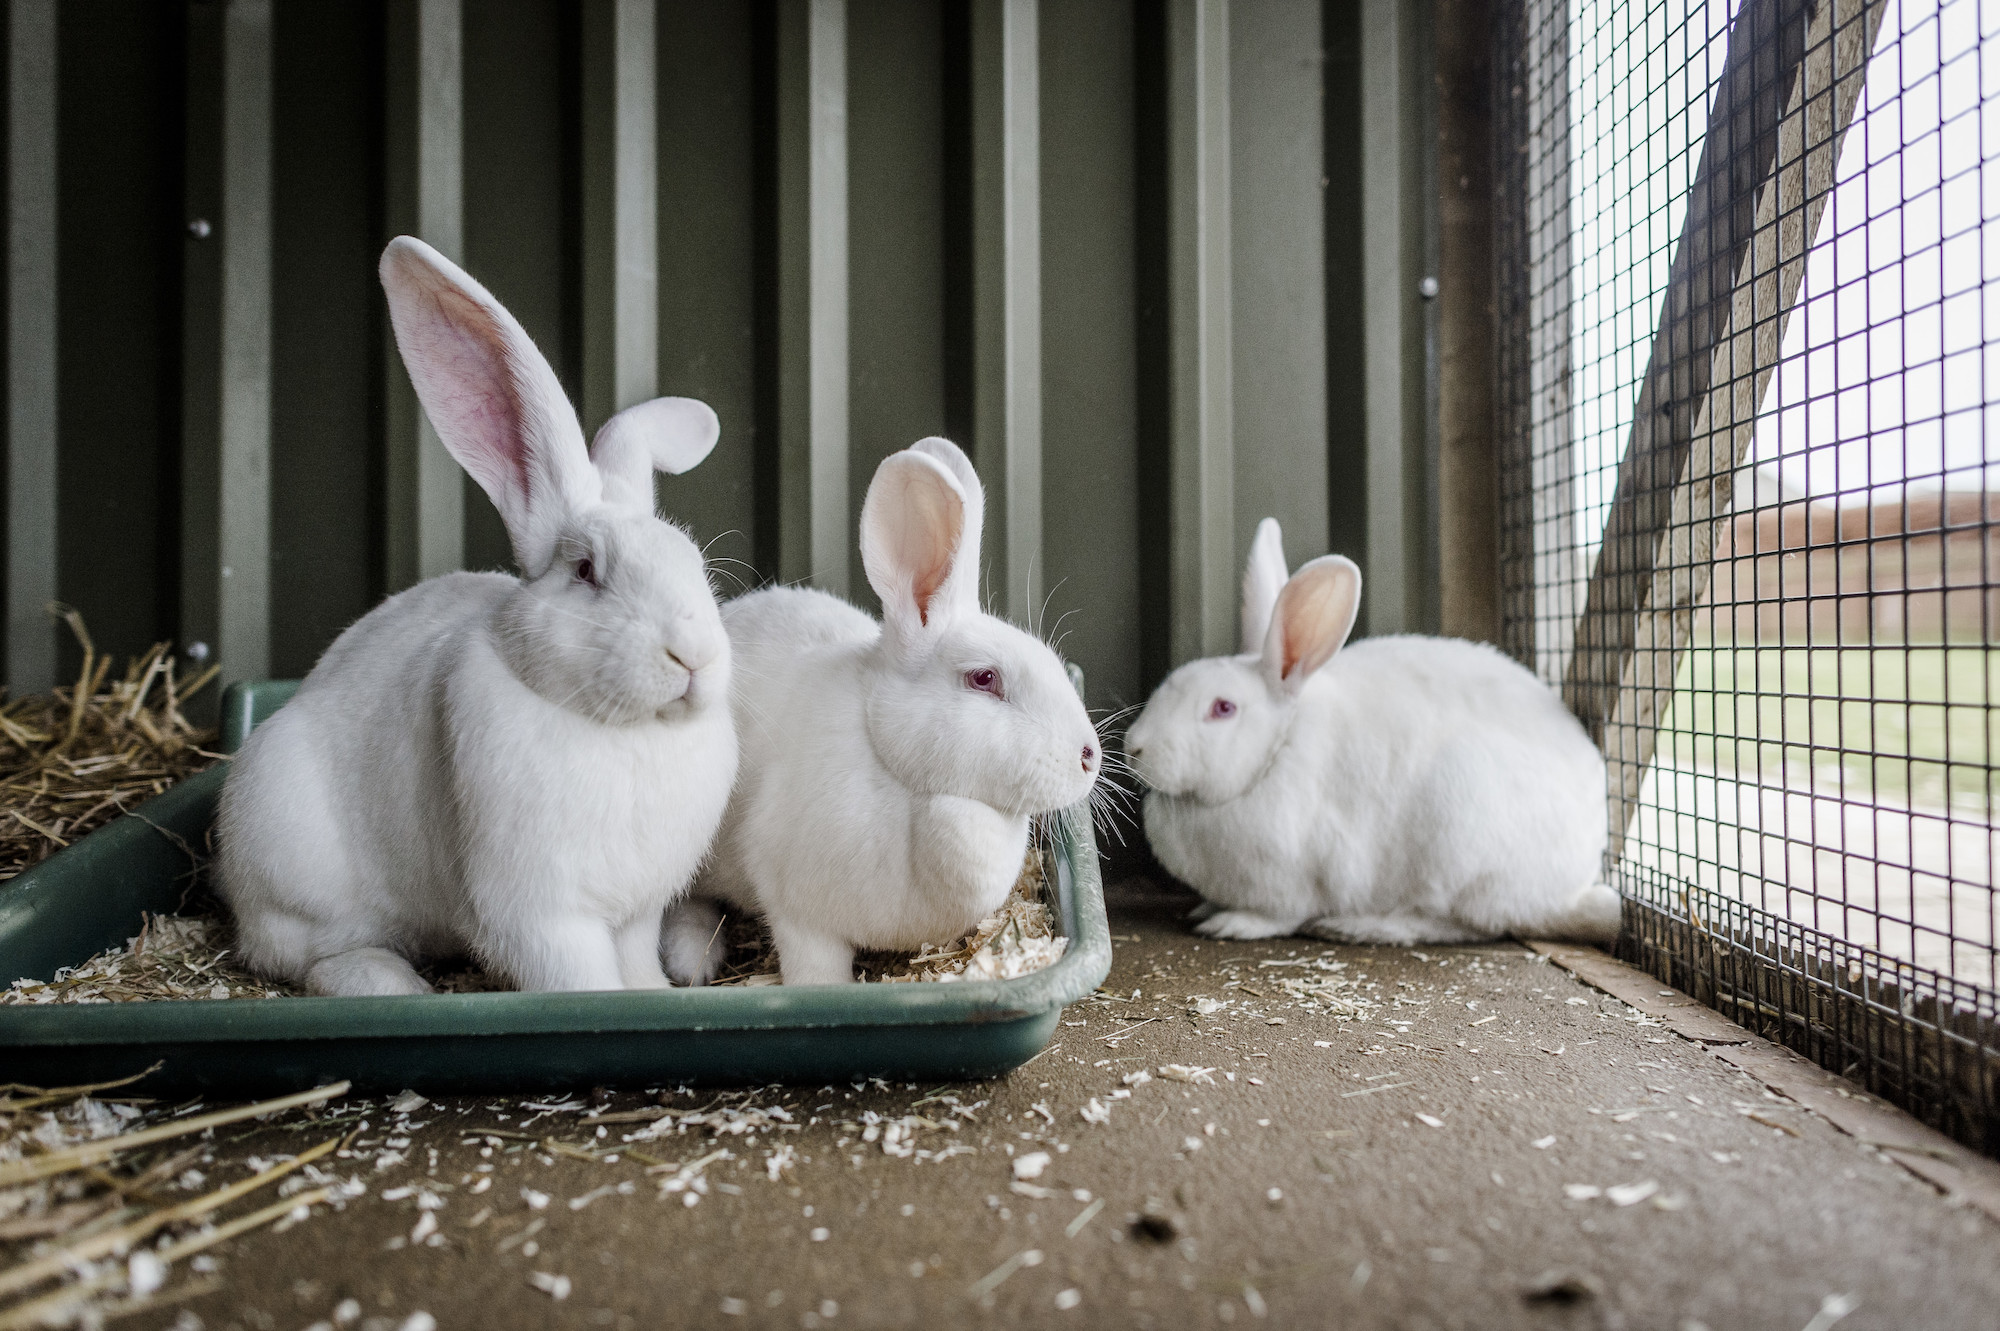 Rabbits Ebenezer, Belle and Fezziwig at Burford rehoming centre